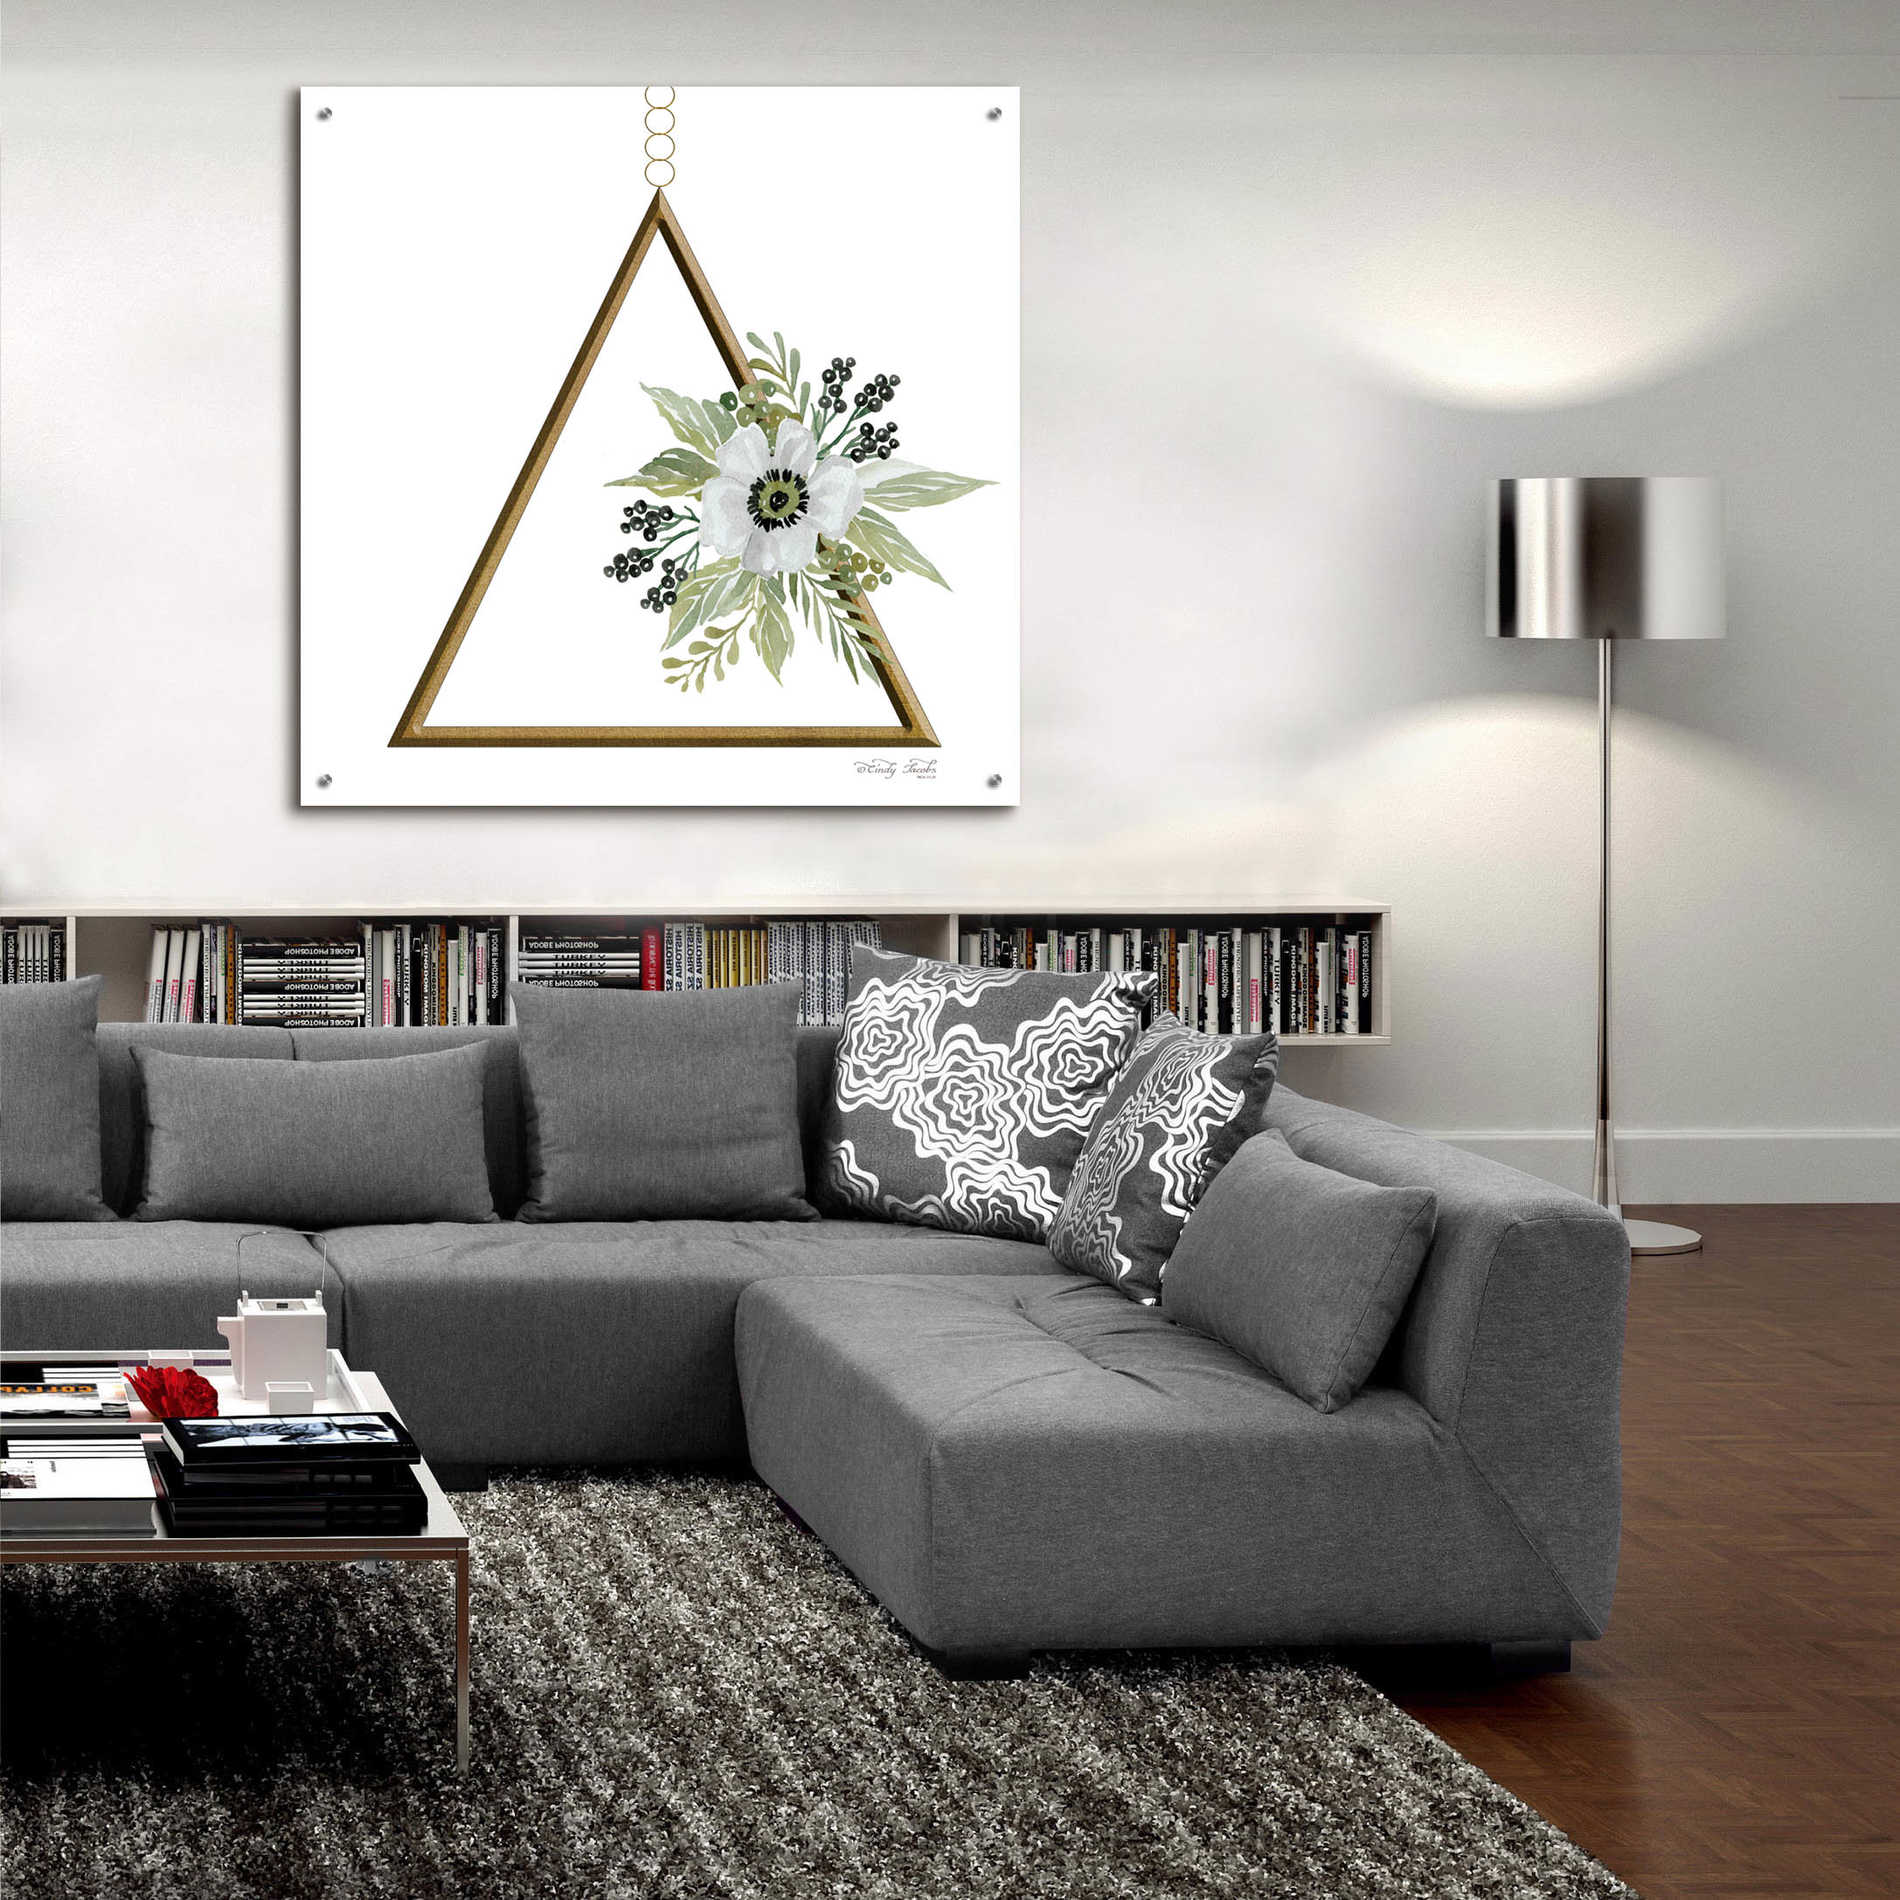 Epic Art 'Geometric Triangle Muted Floral II' by Cindy Jacobs, Acrylic Glass Wall Art,36x36